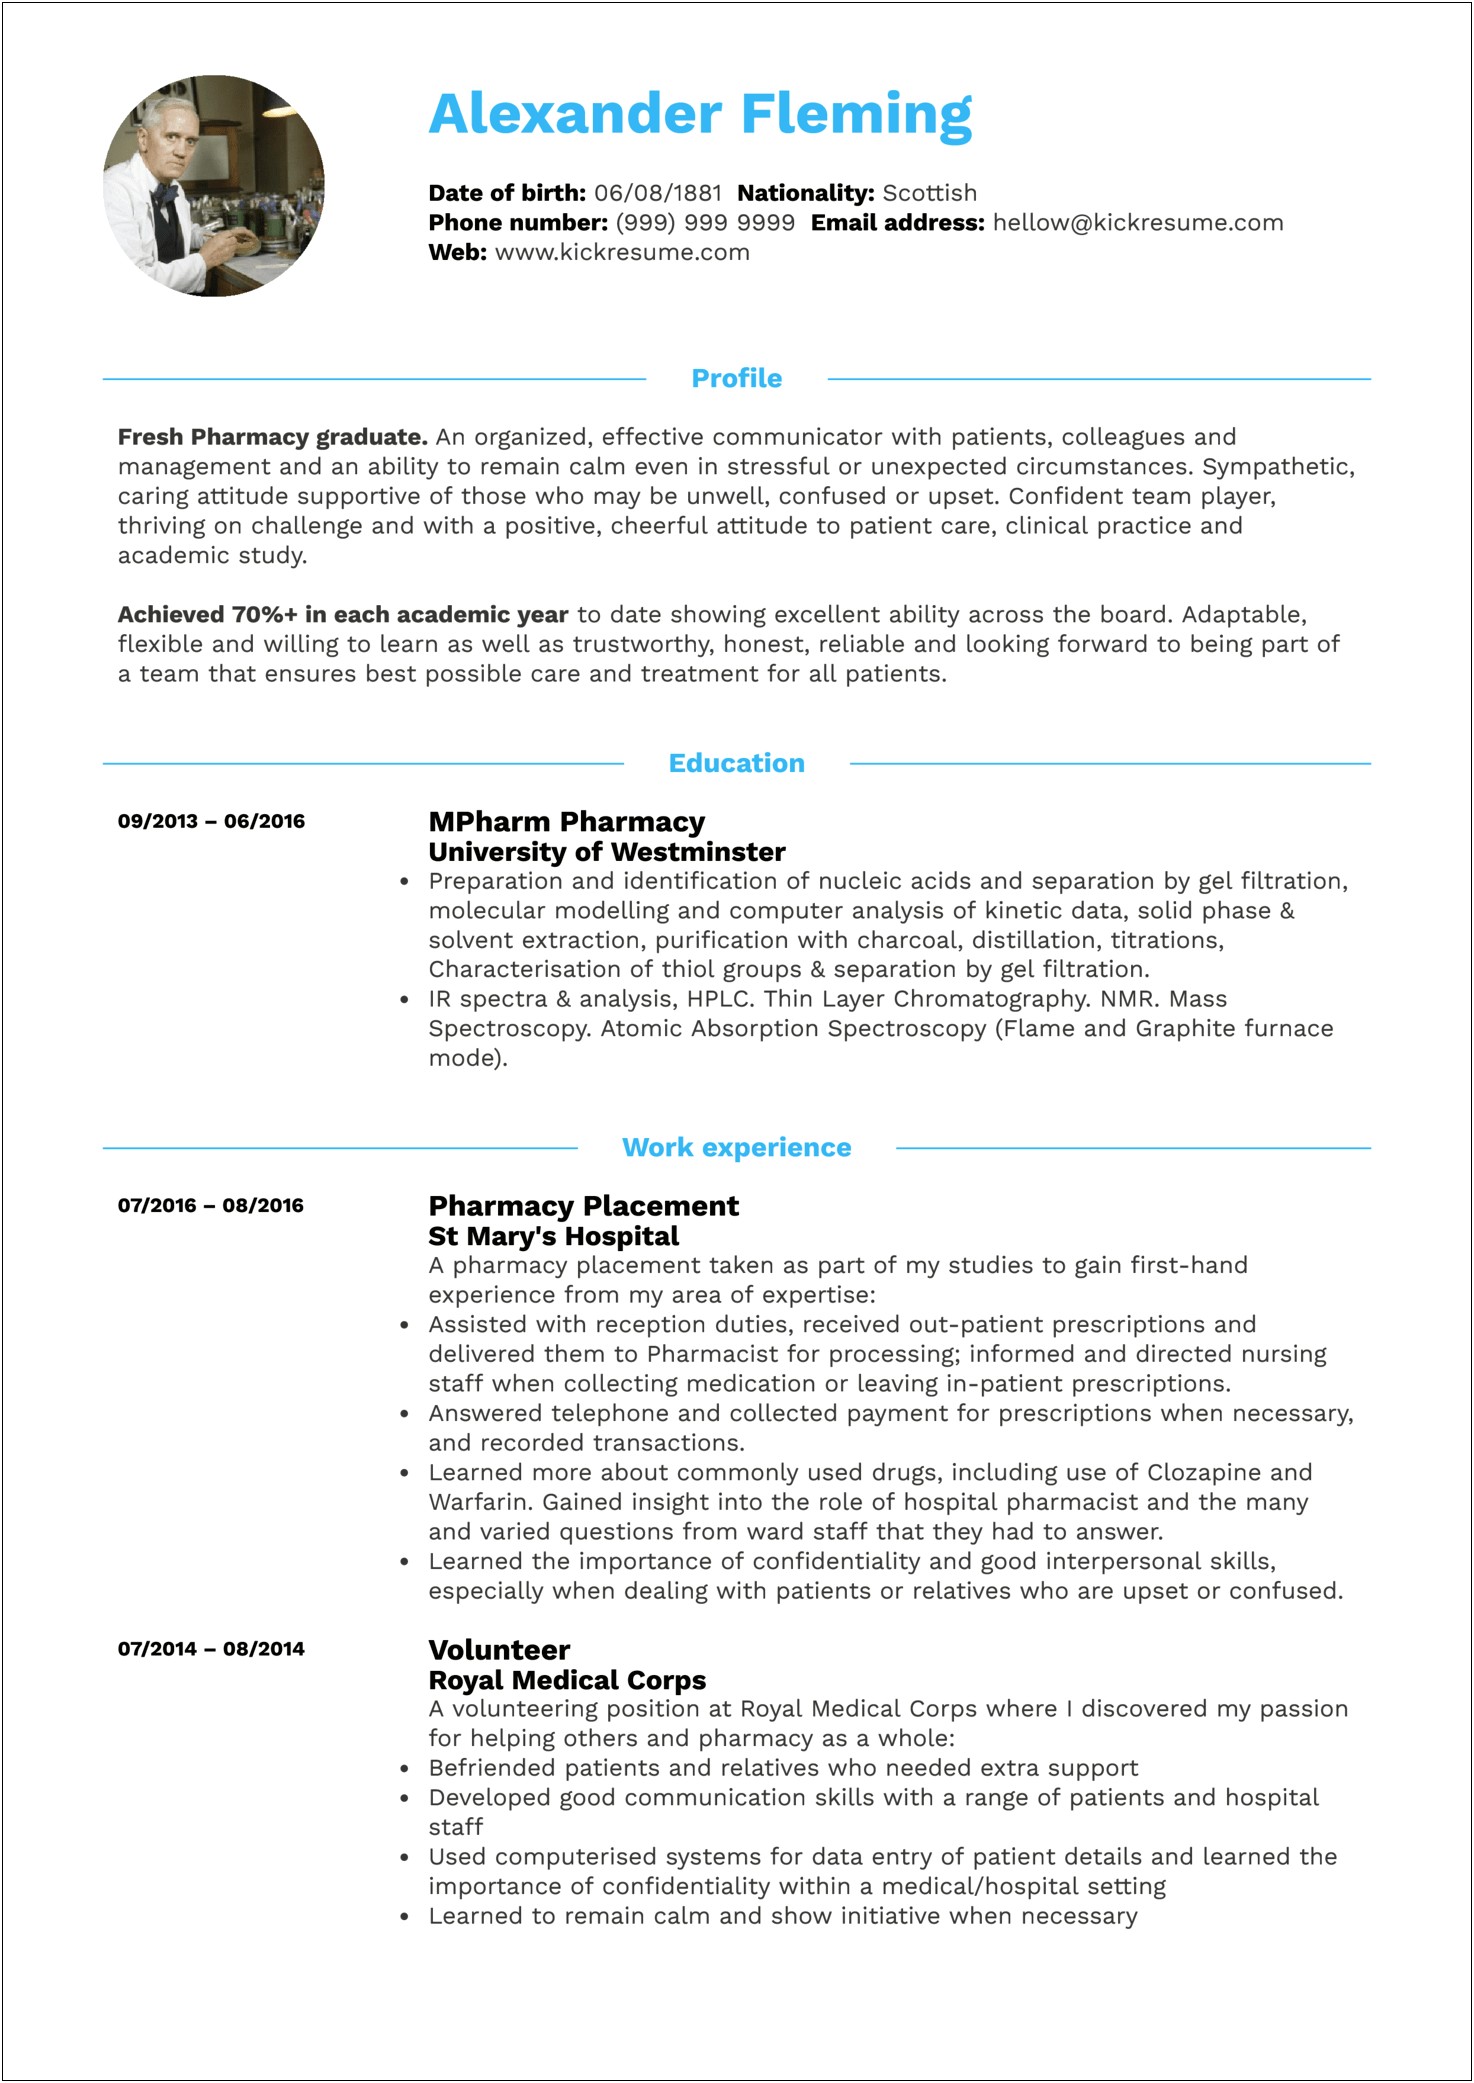 Resume Summary For Doctor Of Business Administration